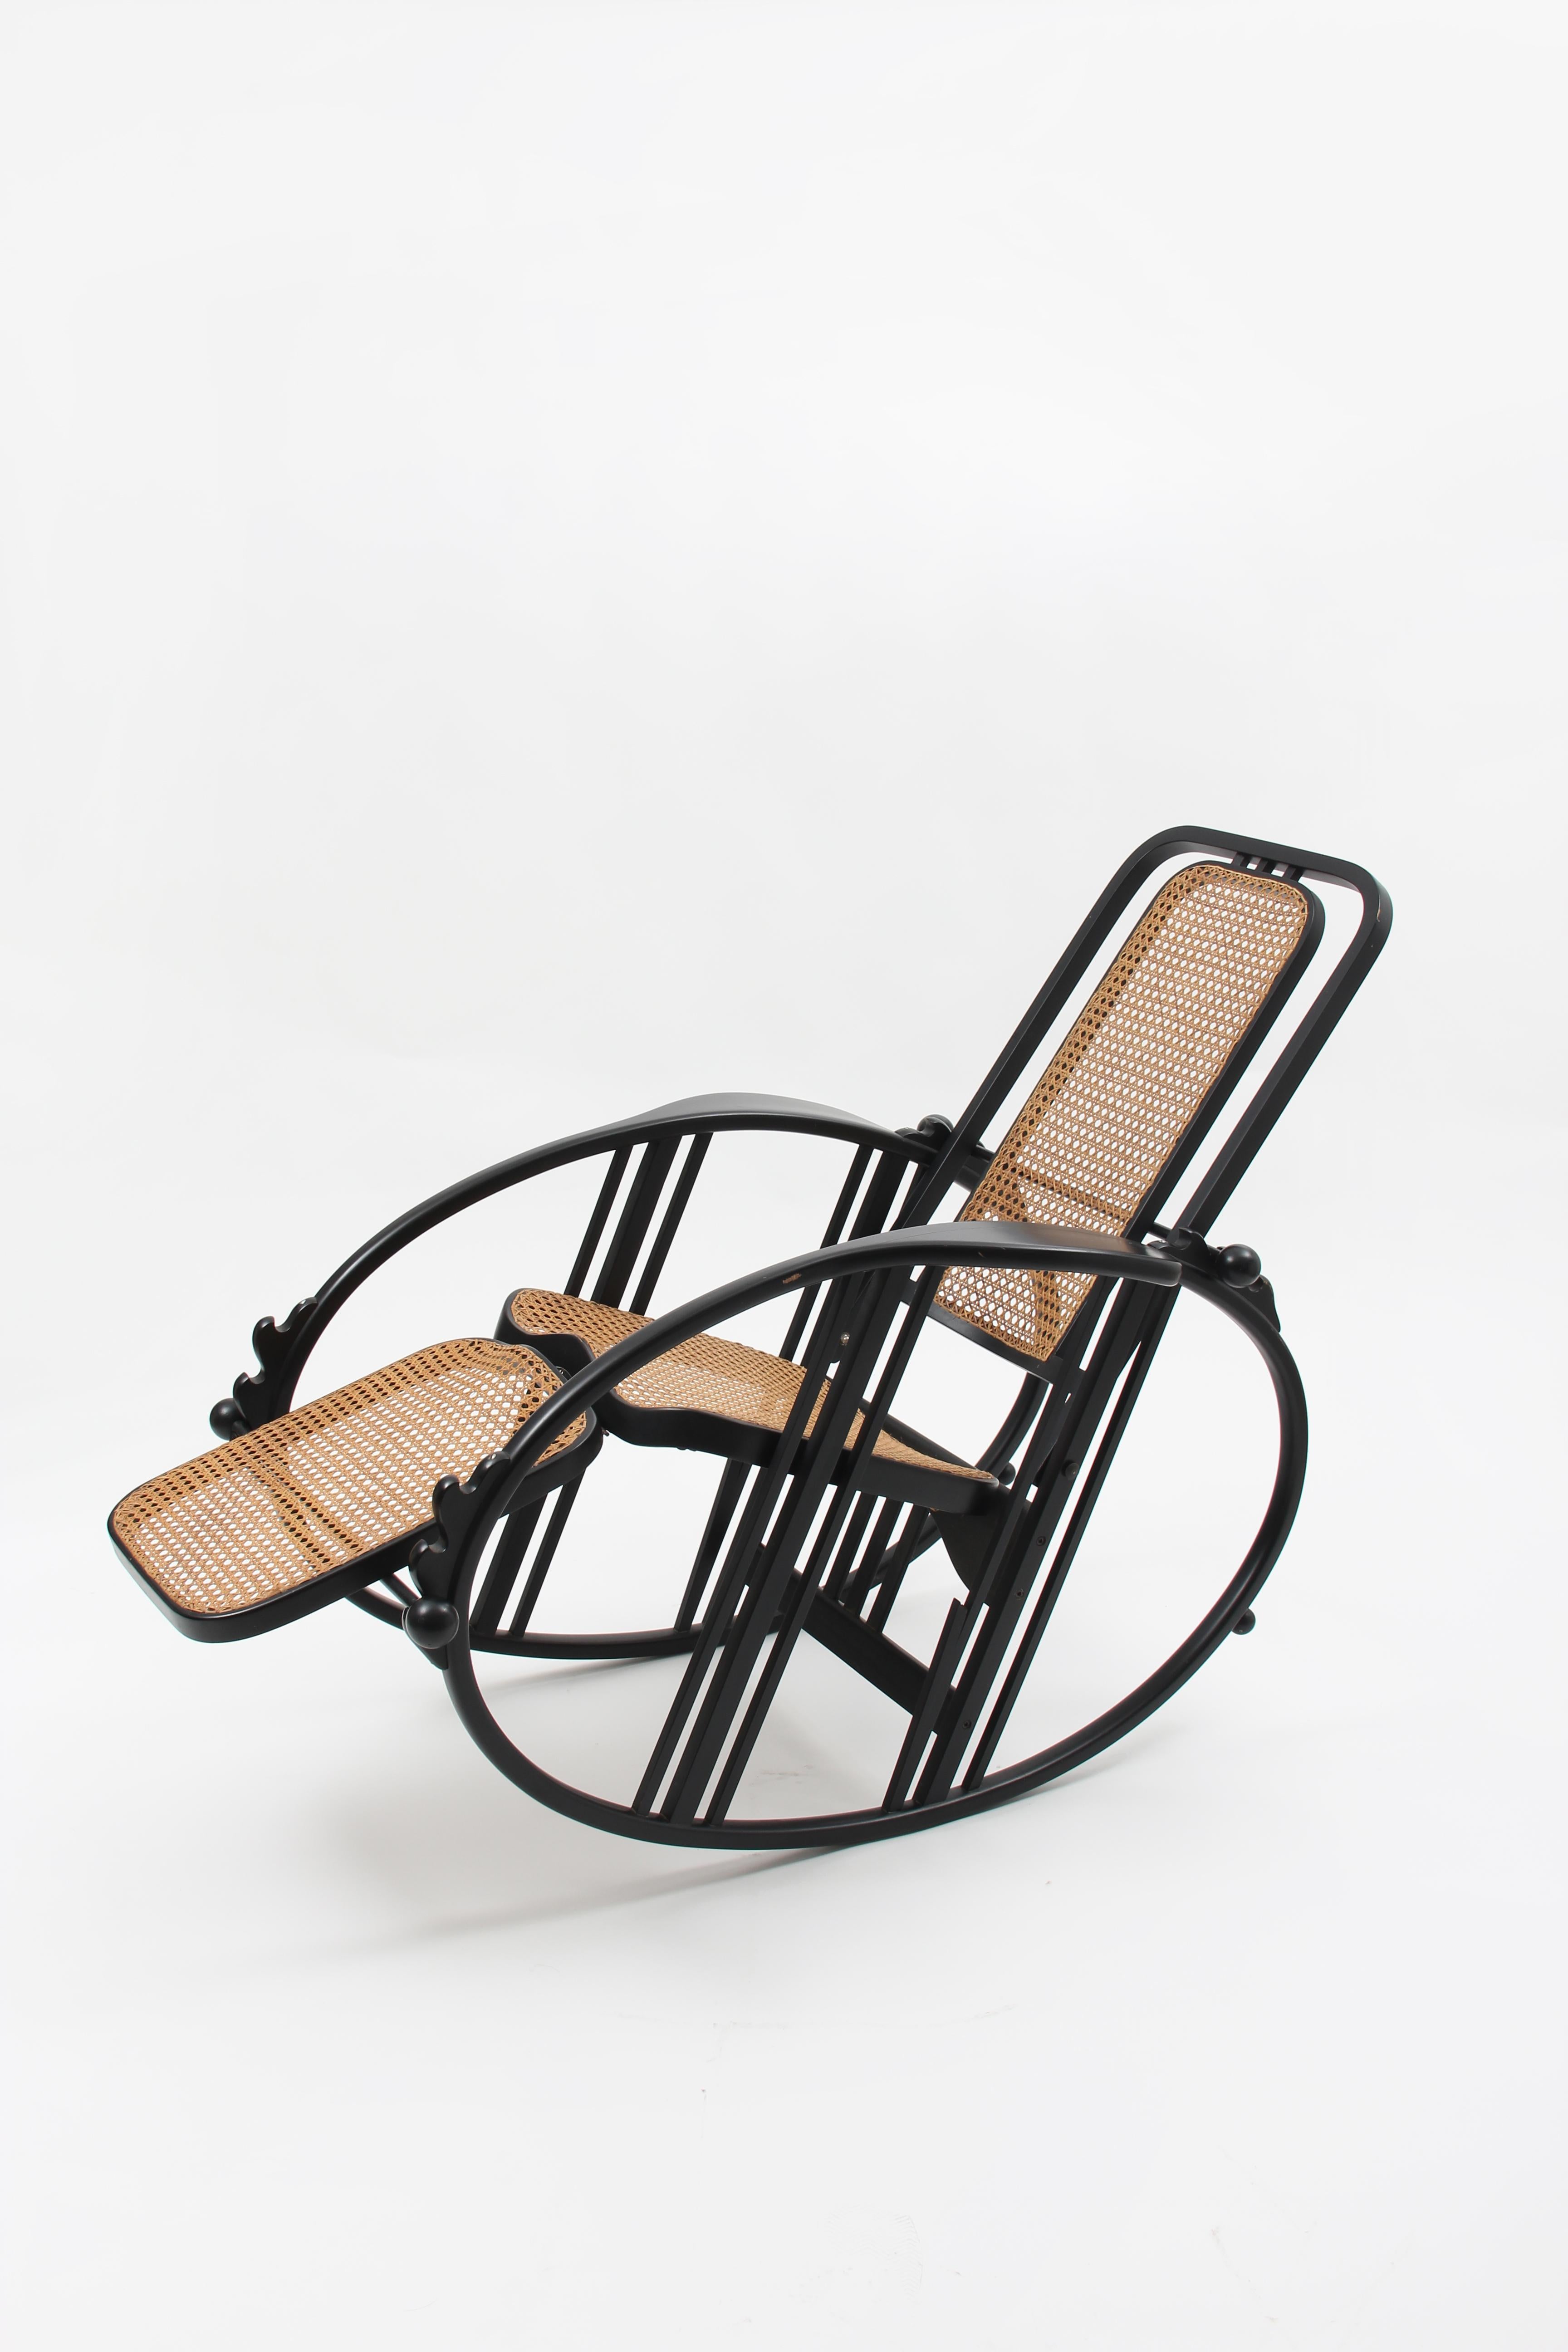 Egg Rocking Chair attributed to Josef Hoffmann for Società Anonima Antonio Volpe 6